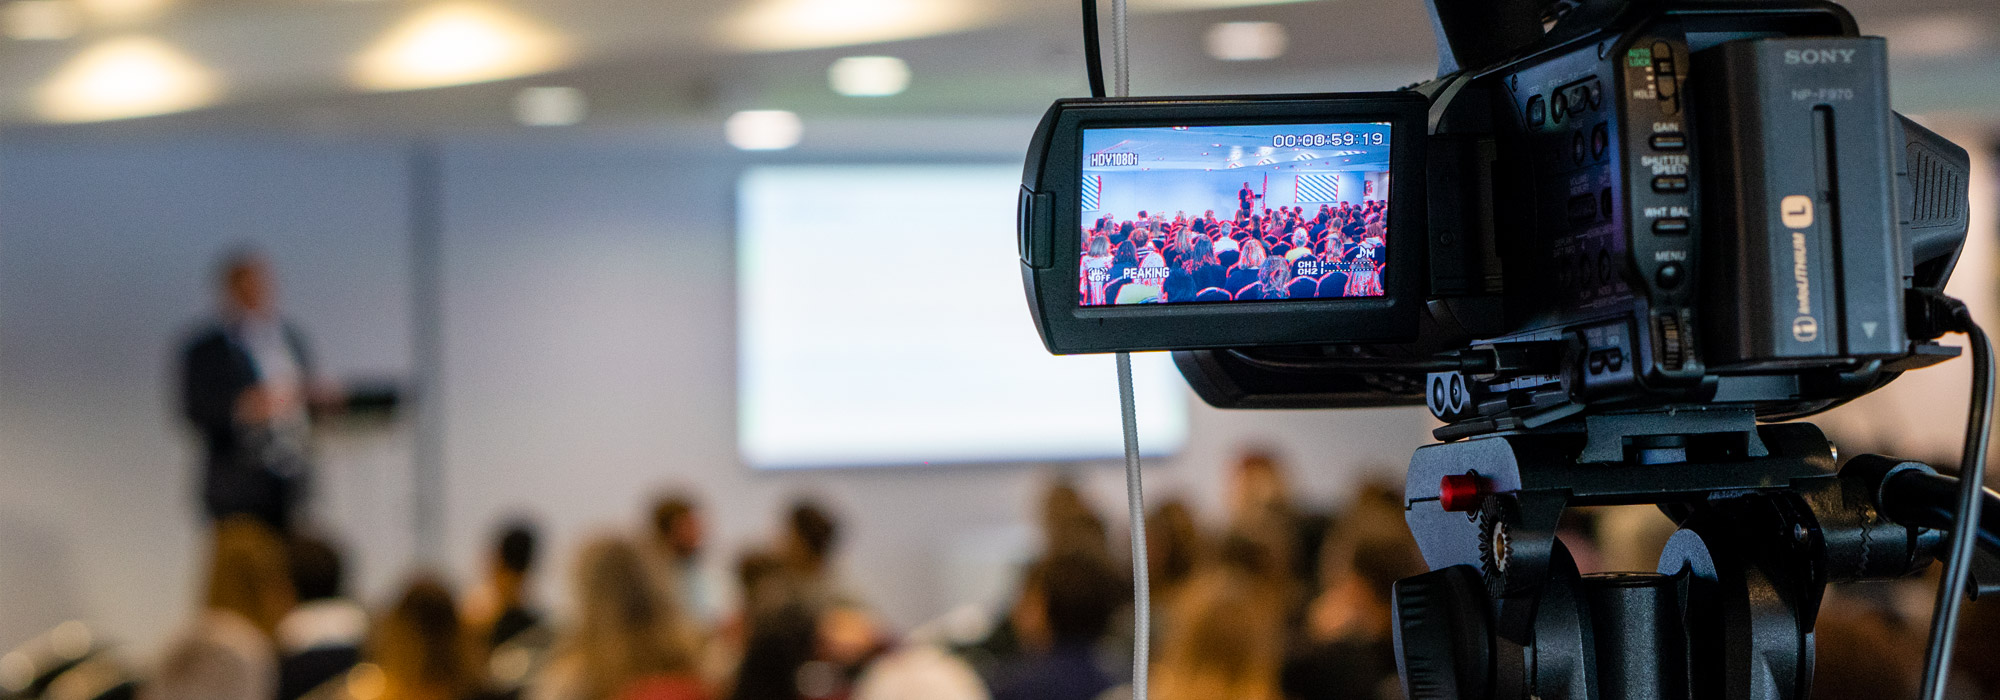 The Exams Office: Virtual Conference Recorded at Oval Cricket Ground, London